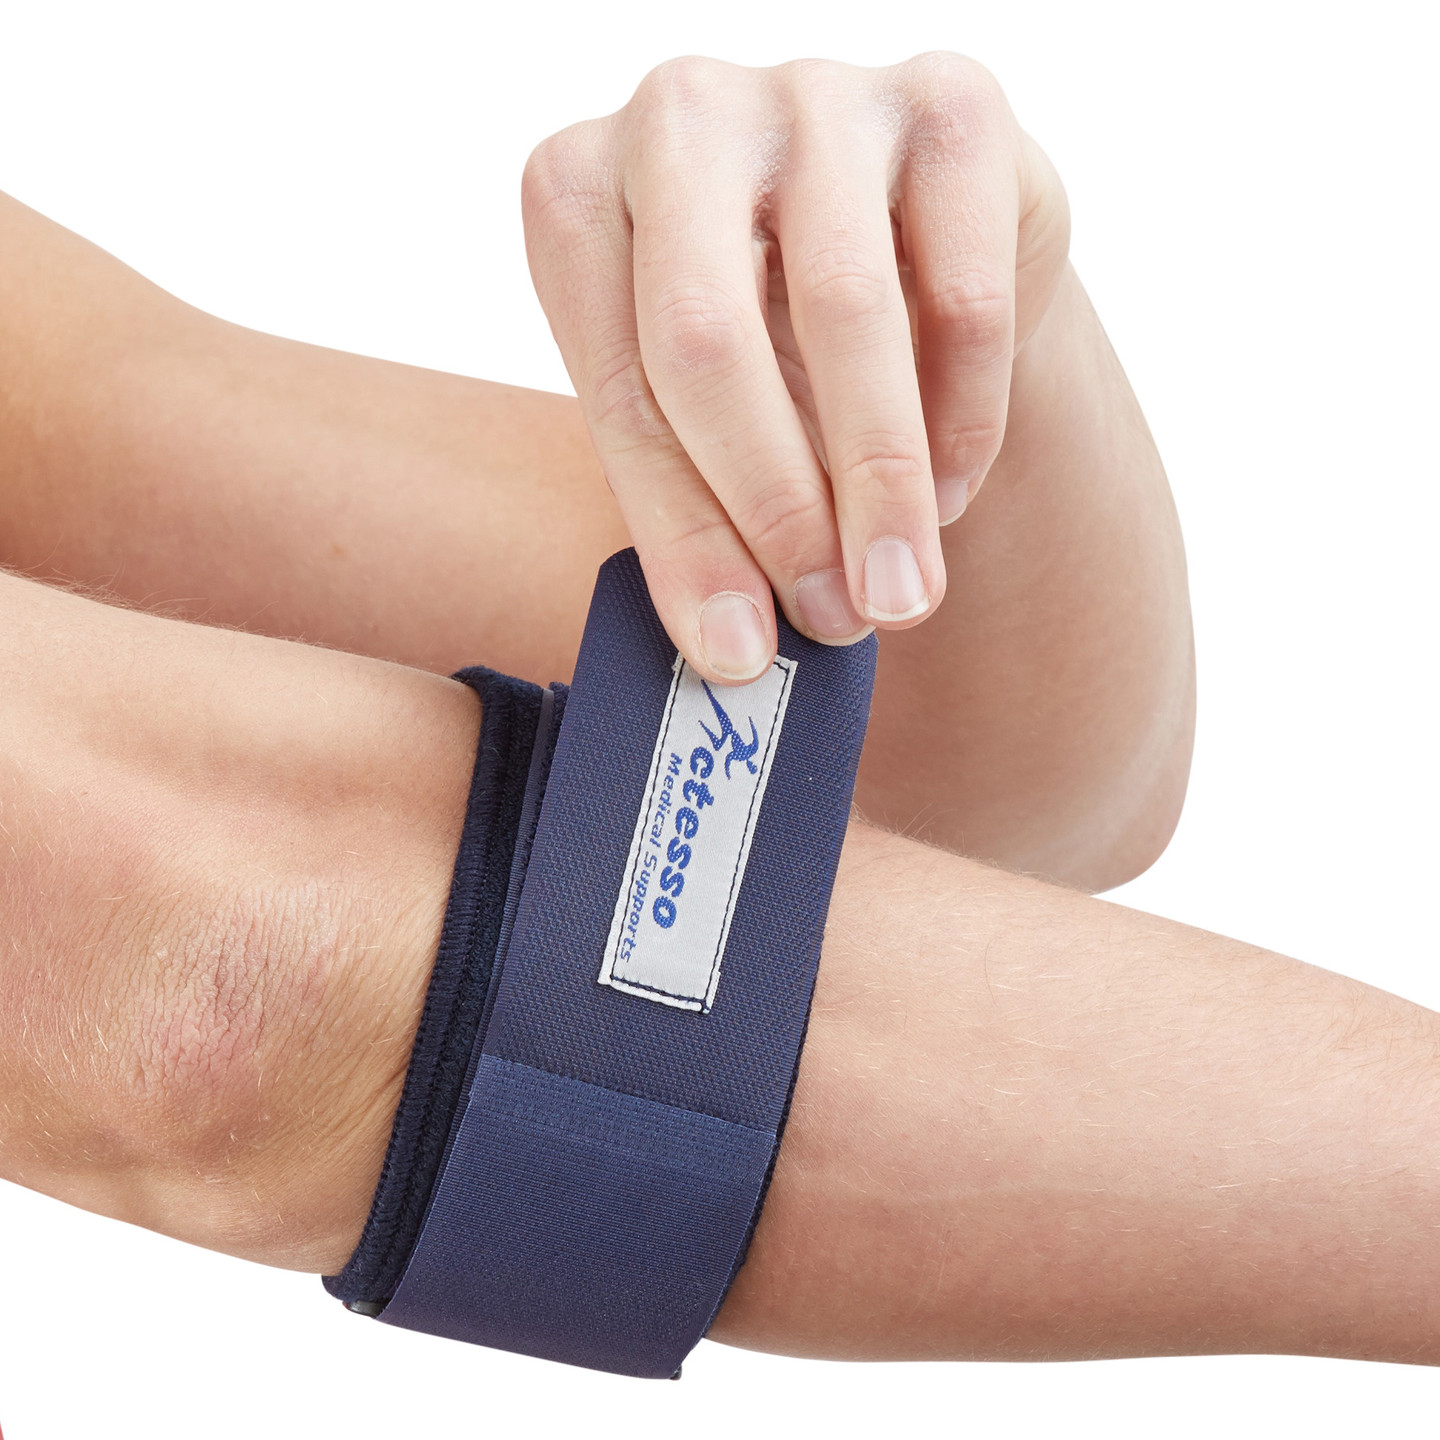 Tennis Elbow Strap  Actesso Medical Support